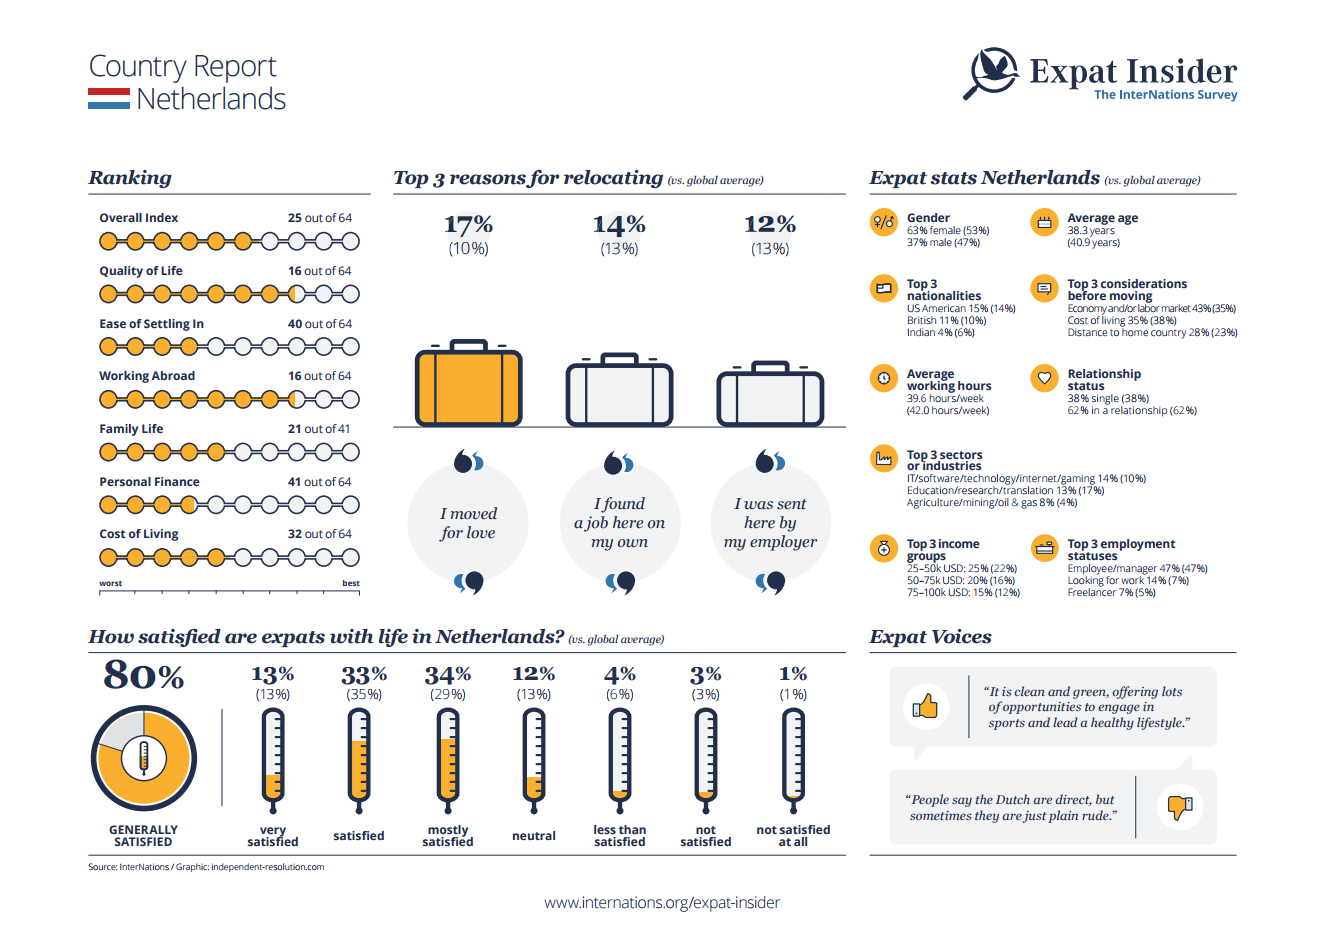 Expat statistics for the Netherlands - infographic